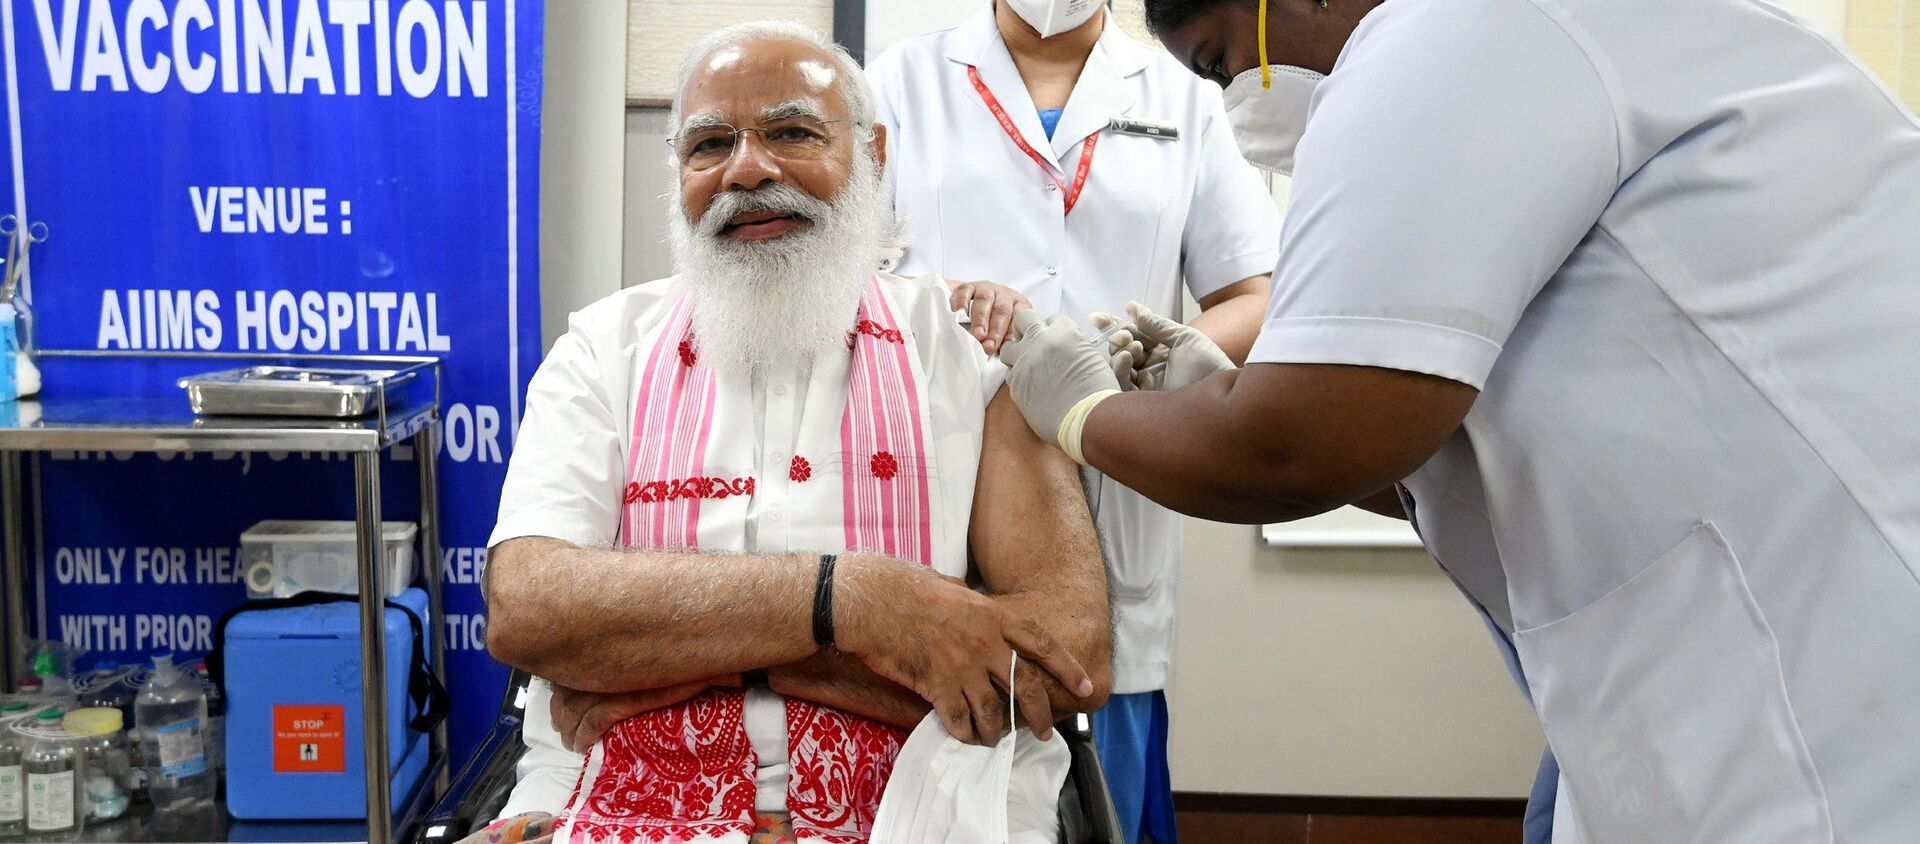 India's Prime Minister Narendra Modi receives a dose of COVAXIN, a coronavirus disease (COVID-19) vaccine developed by India's Bharat Biotech and the state-run Indian Council of Medical Research, at All India Institute of Medical Sciences (AIIMS) hospital in New Delhi, India, March 1, 2021 - 俄羅斯衛星通訊社, 1920, 01.03.2021